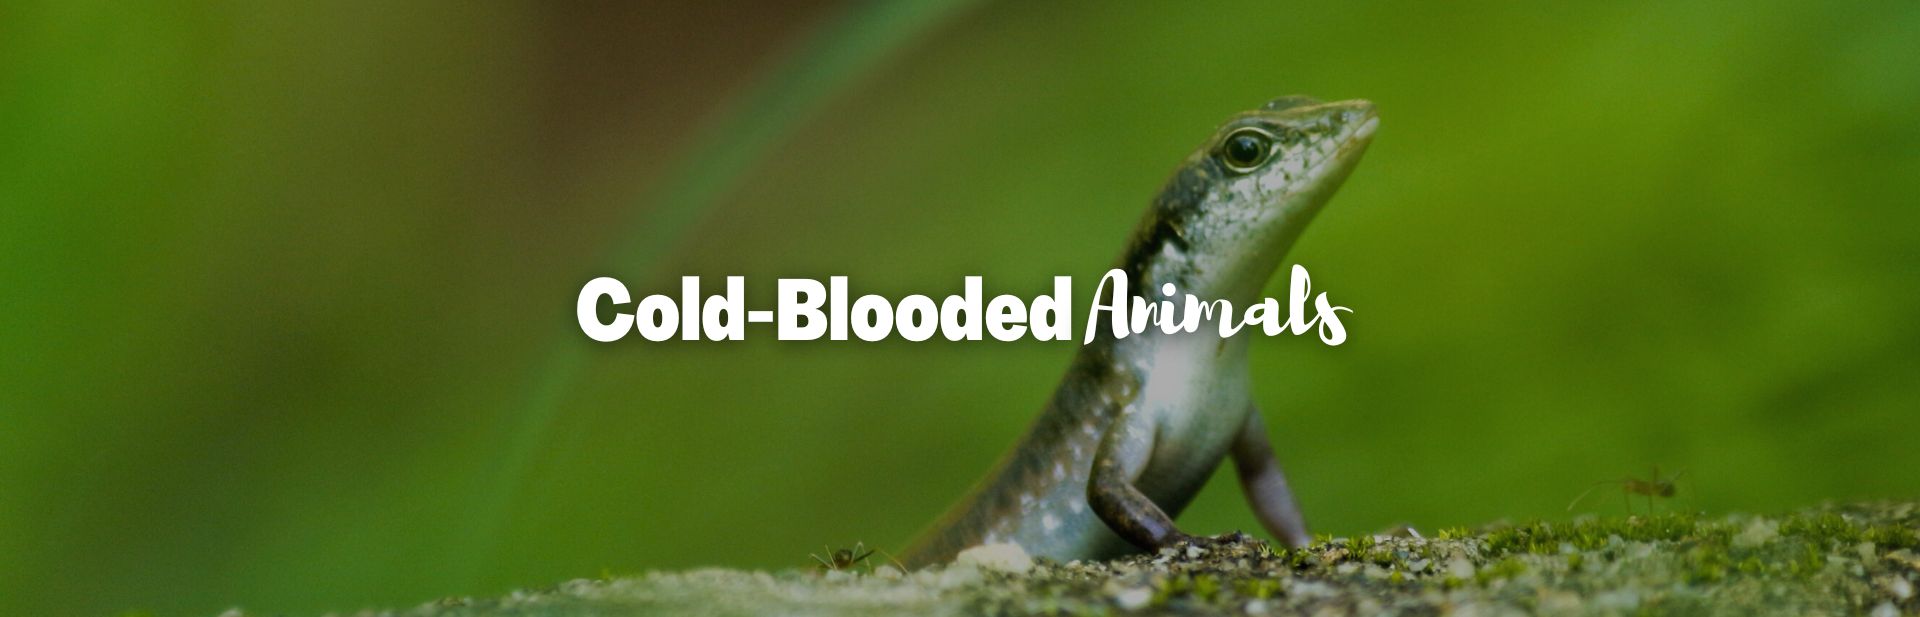 Cold-Blooded Animals Listed: The Coolest Creatures in the World, Literally!  - Outforia